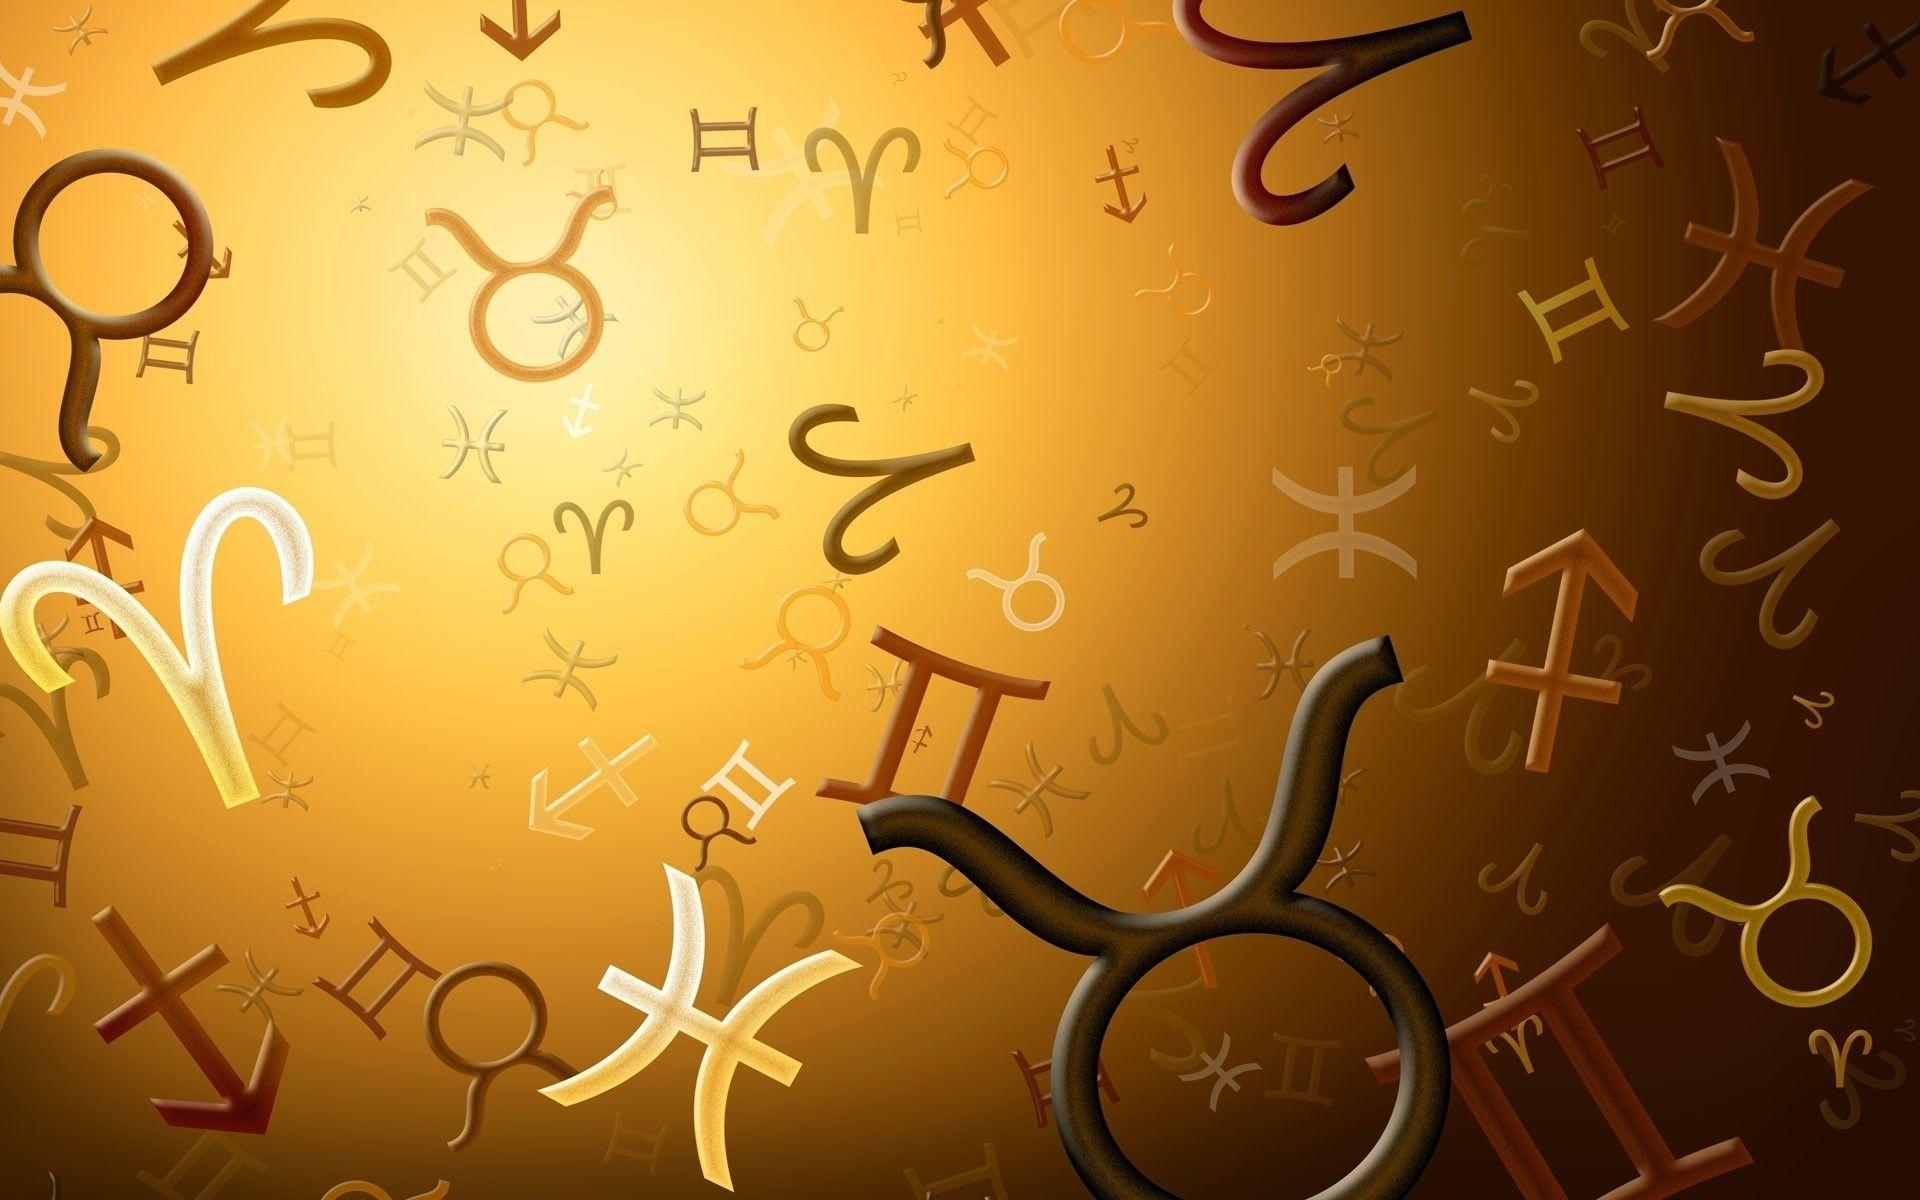 Zodiac signs Signs of the Zodiac soar on a brown background